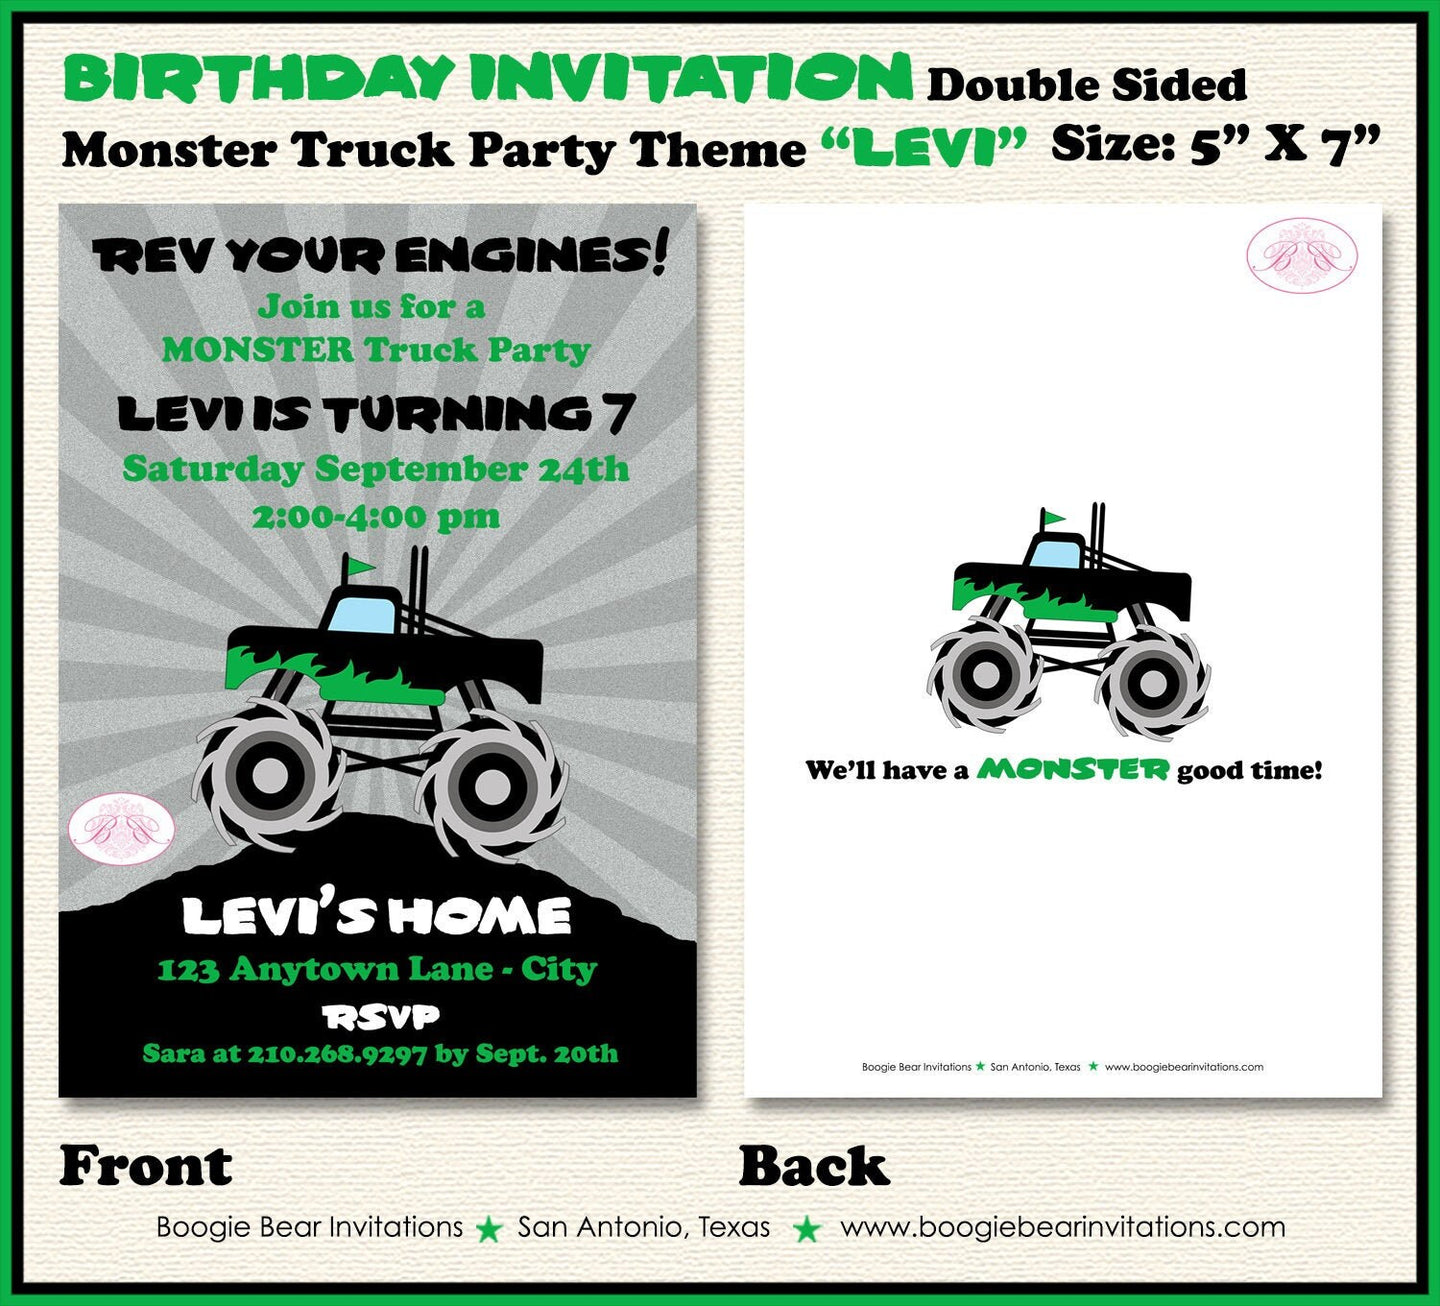 Monster Truck Birthday Party Invitation Green Boy Girl Event Show Arena Rally Boogie Bear Invitations Levi Theme Paperless Printable Printed